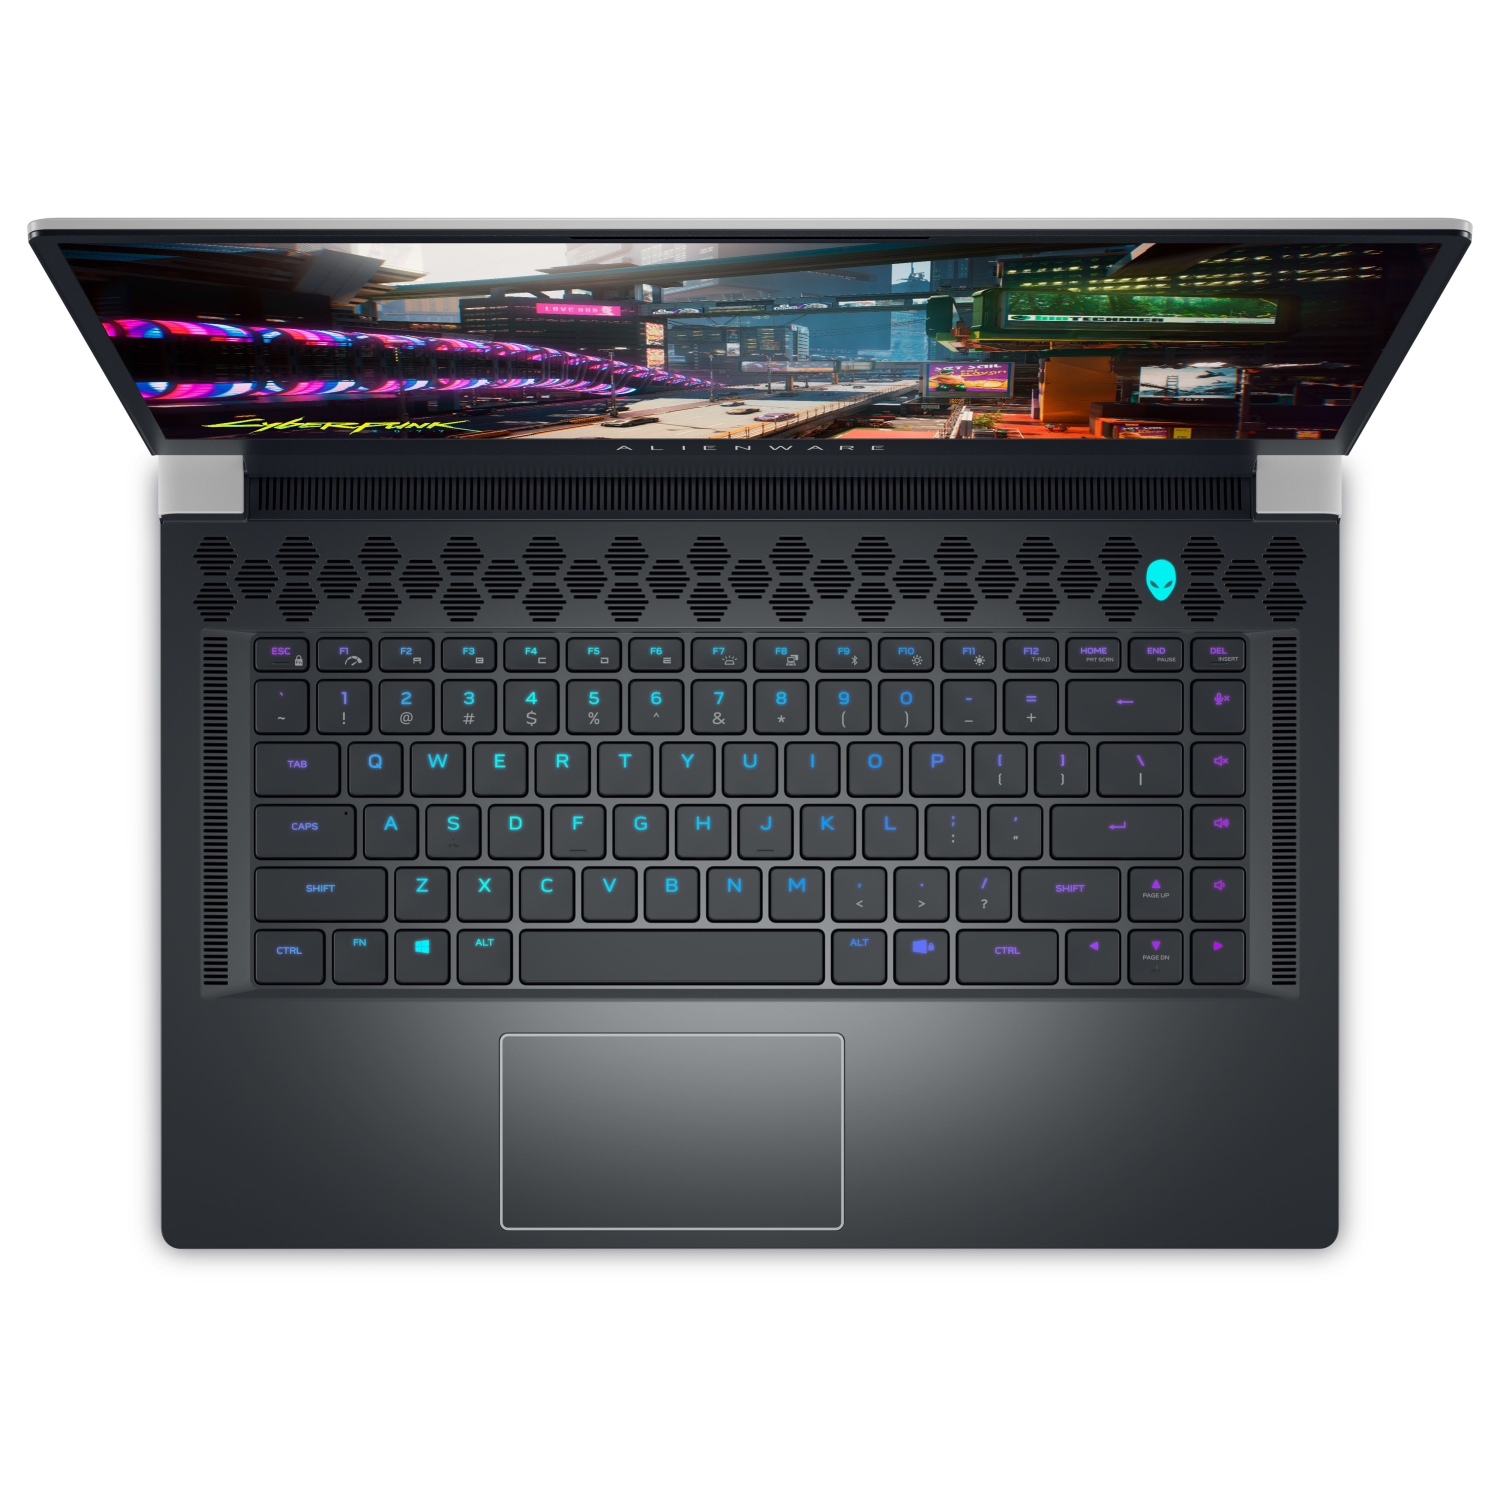 Refurbished (Excellent) – Dell Alienware X15 R2 Gaming Laptop (2022) | 15.6" FHD | Core i7 - 1TB SSD + 1TB SSD - 16GB RAM - RTX 3060 | 14 Cores @ 4.7 GHz - 12th Gen CPU - 6GB GDDR6